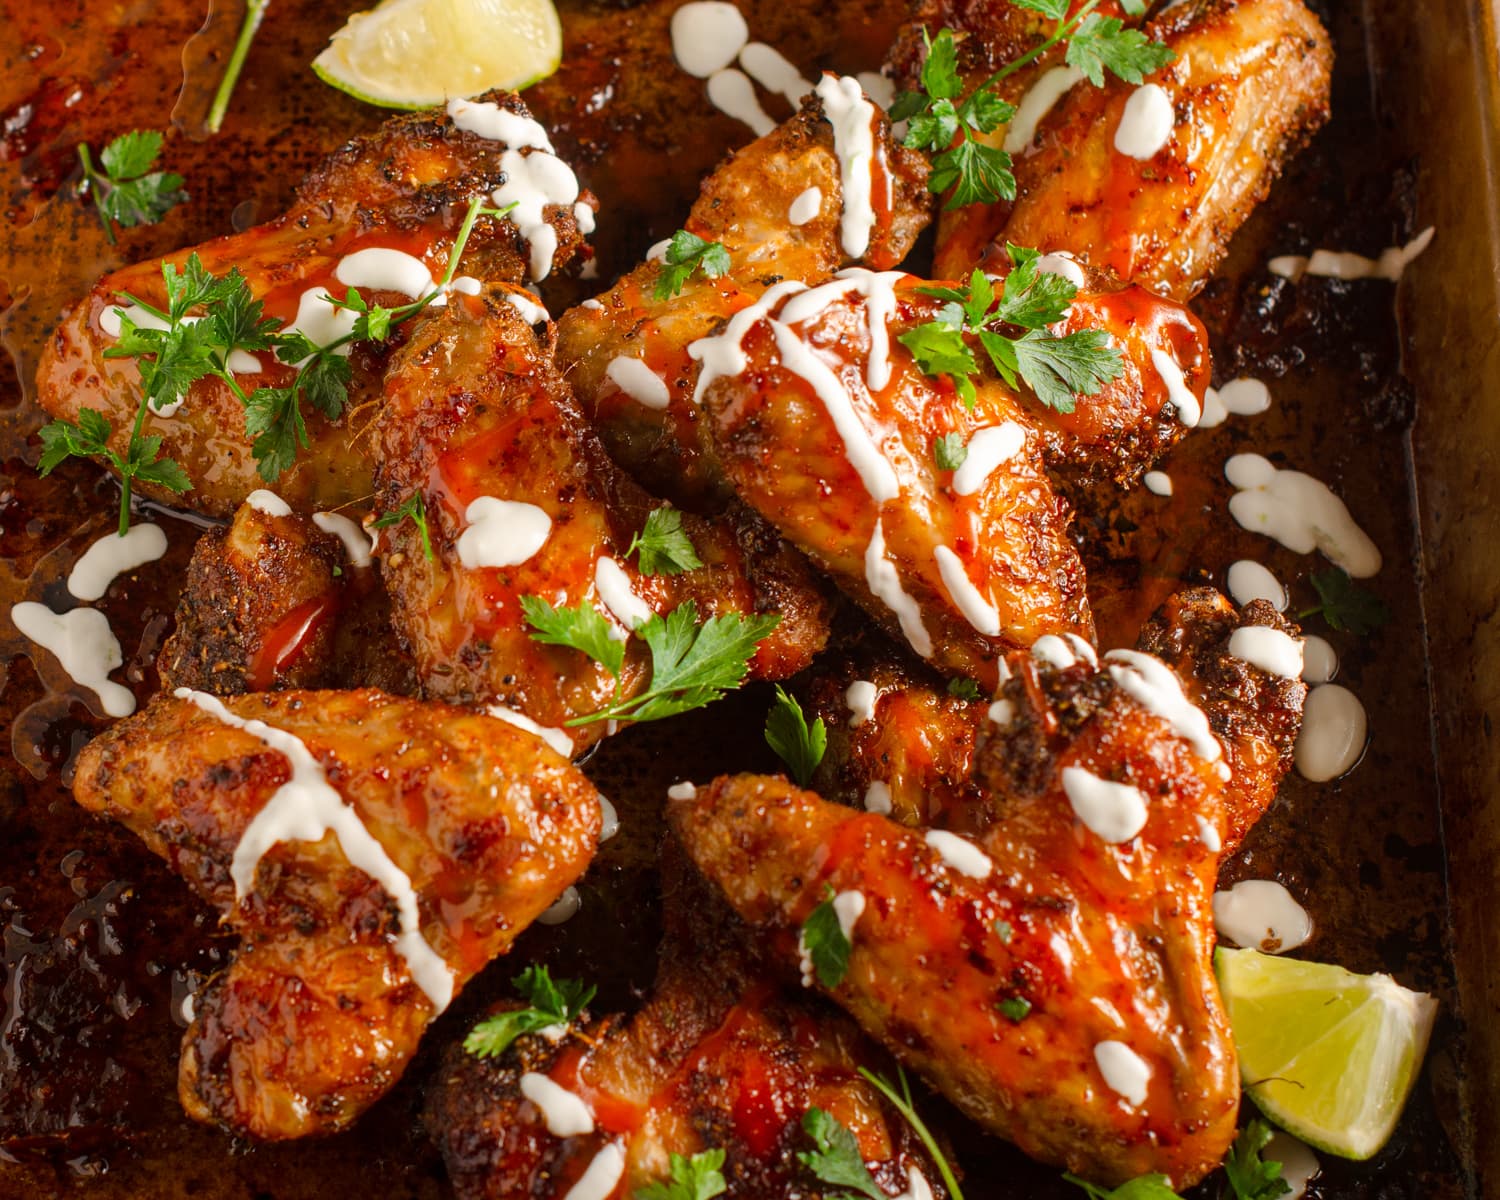 Spicy oven baked chicken wings served with a creamy lime sured cream, hot sauce, coriander and fresh limes.